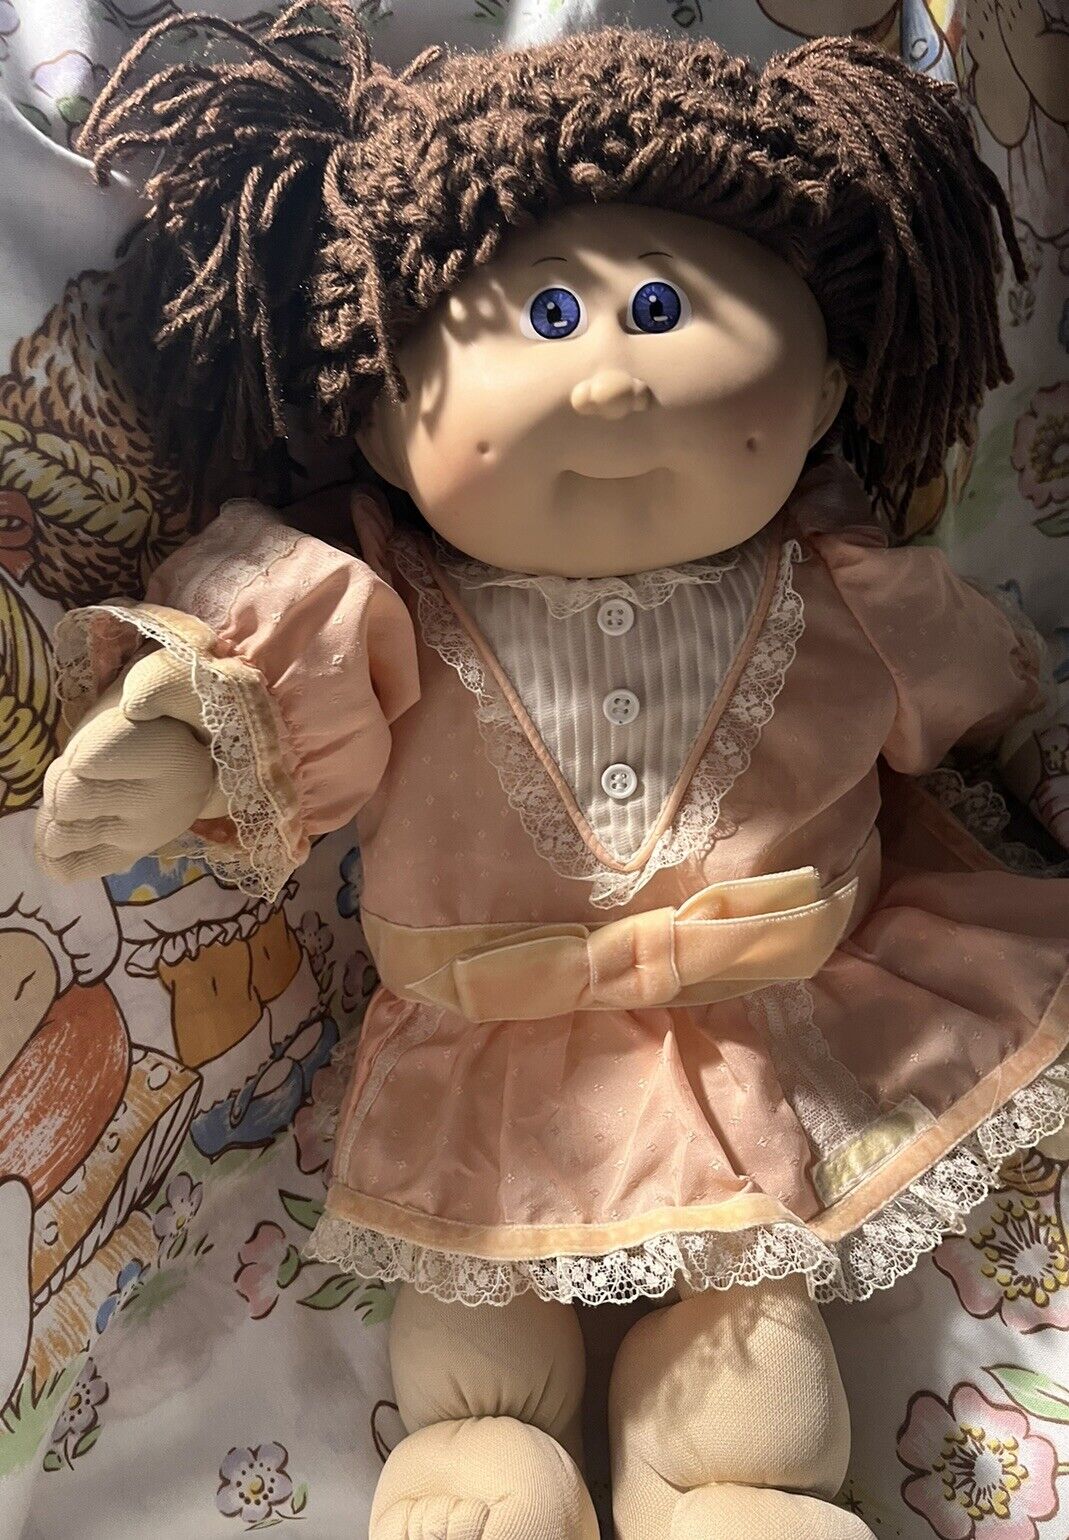 Vintage 1985 Cabbage Patch Doll - #9 Head Mold - Brown Hair, Blue/violet Eyes